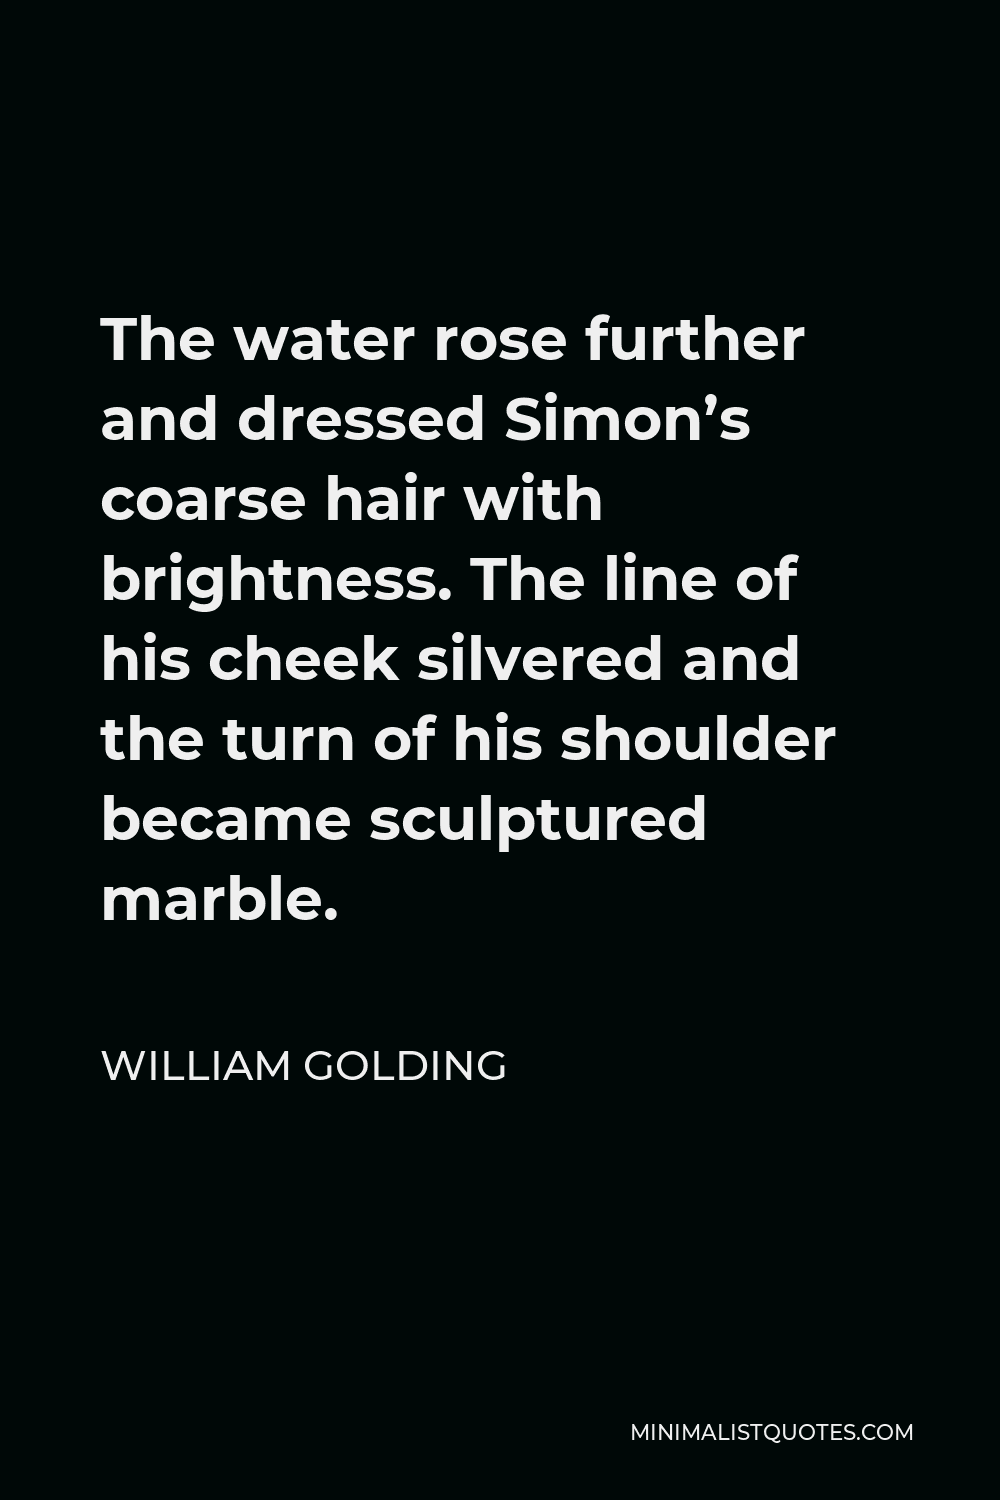 William Golding Quote - The water rose further and dressed Simon’s coarse hair with brightness. The line of his cheek silvered and the turn of his shoulder became sculptured marble.